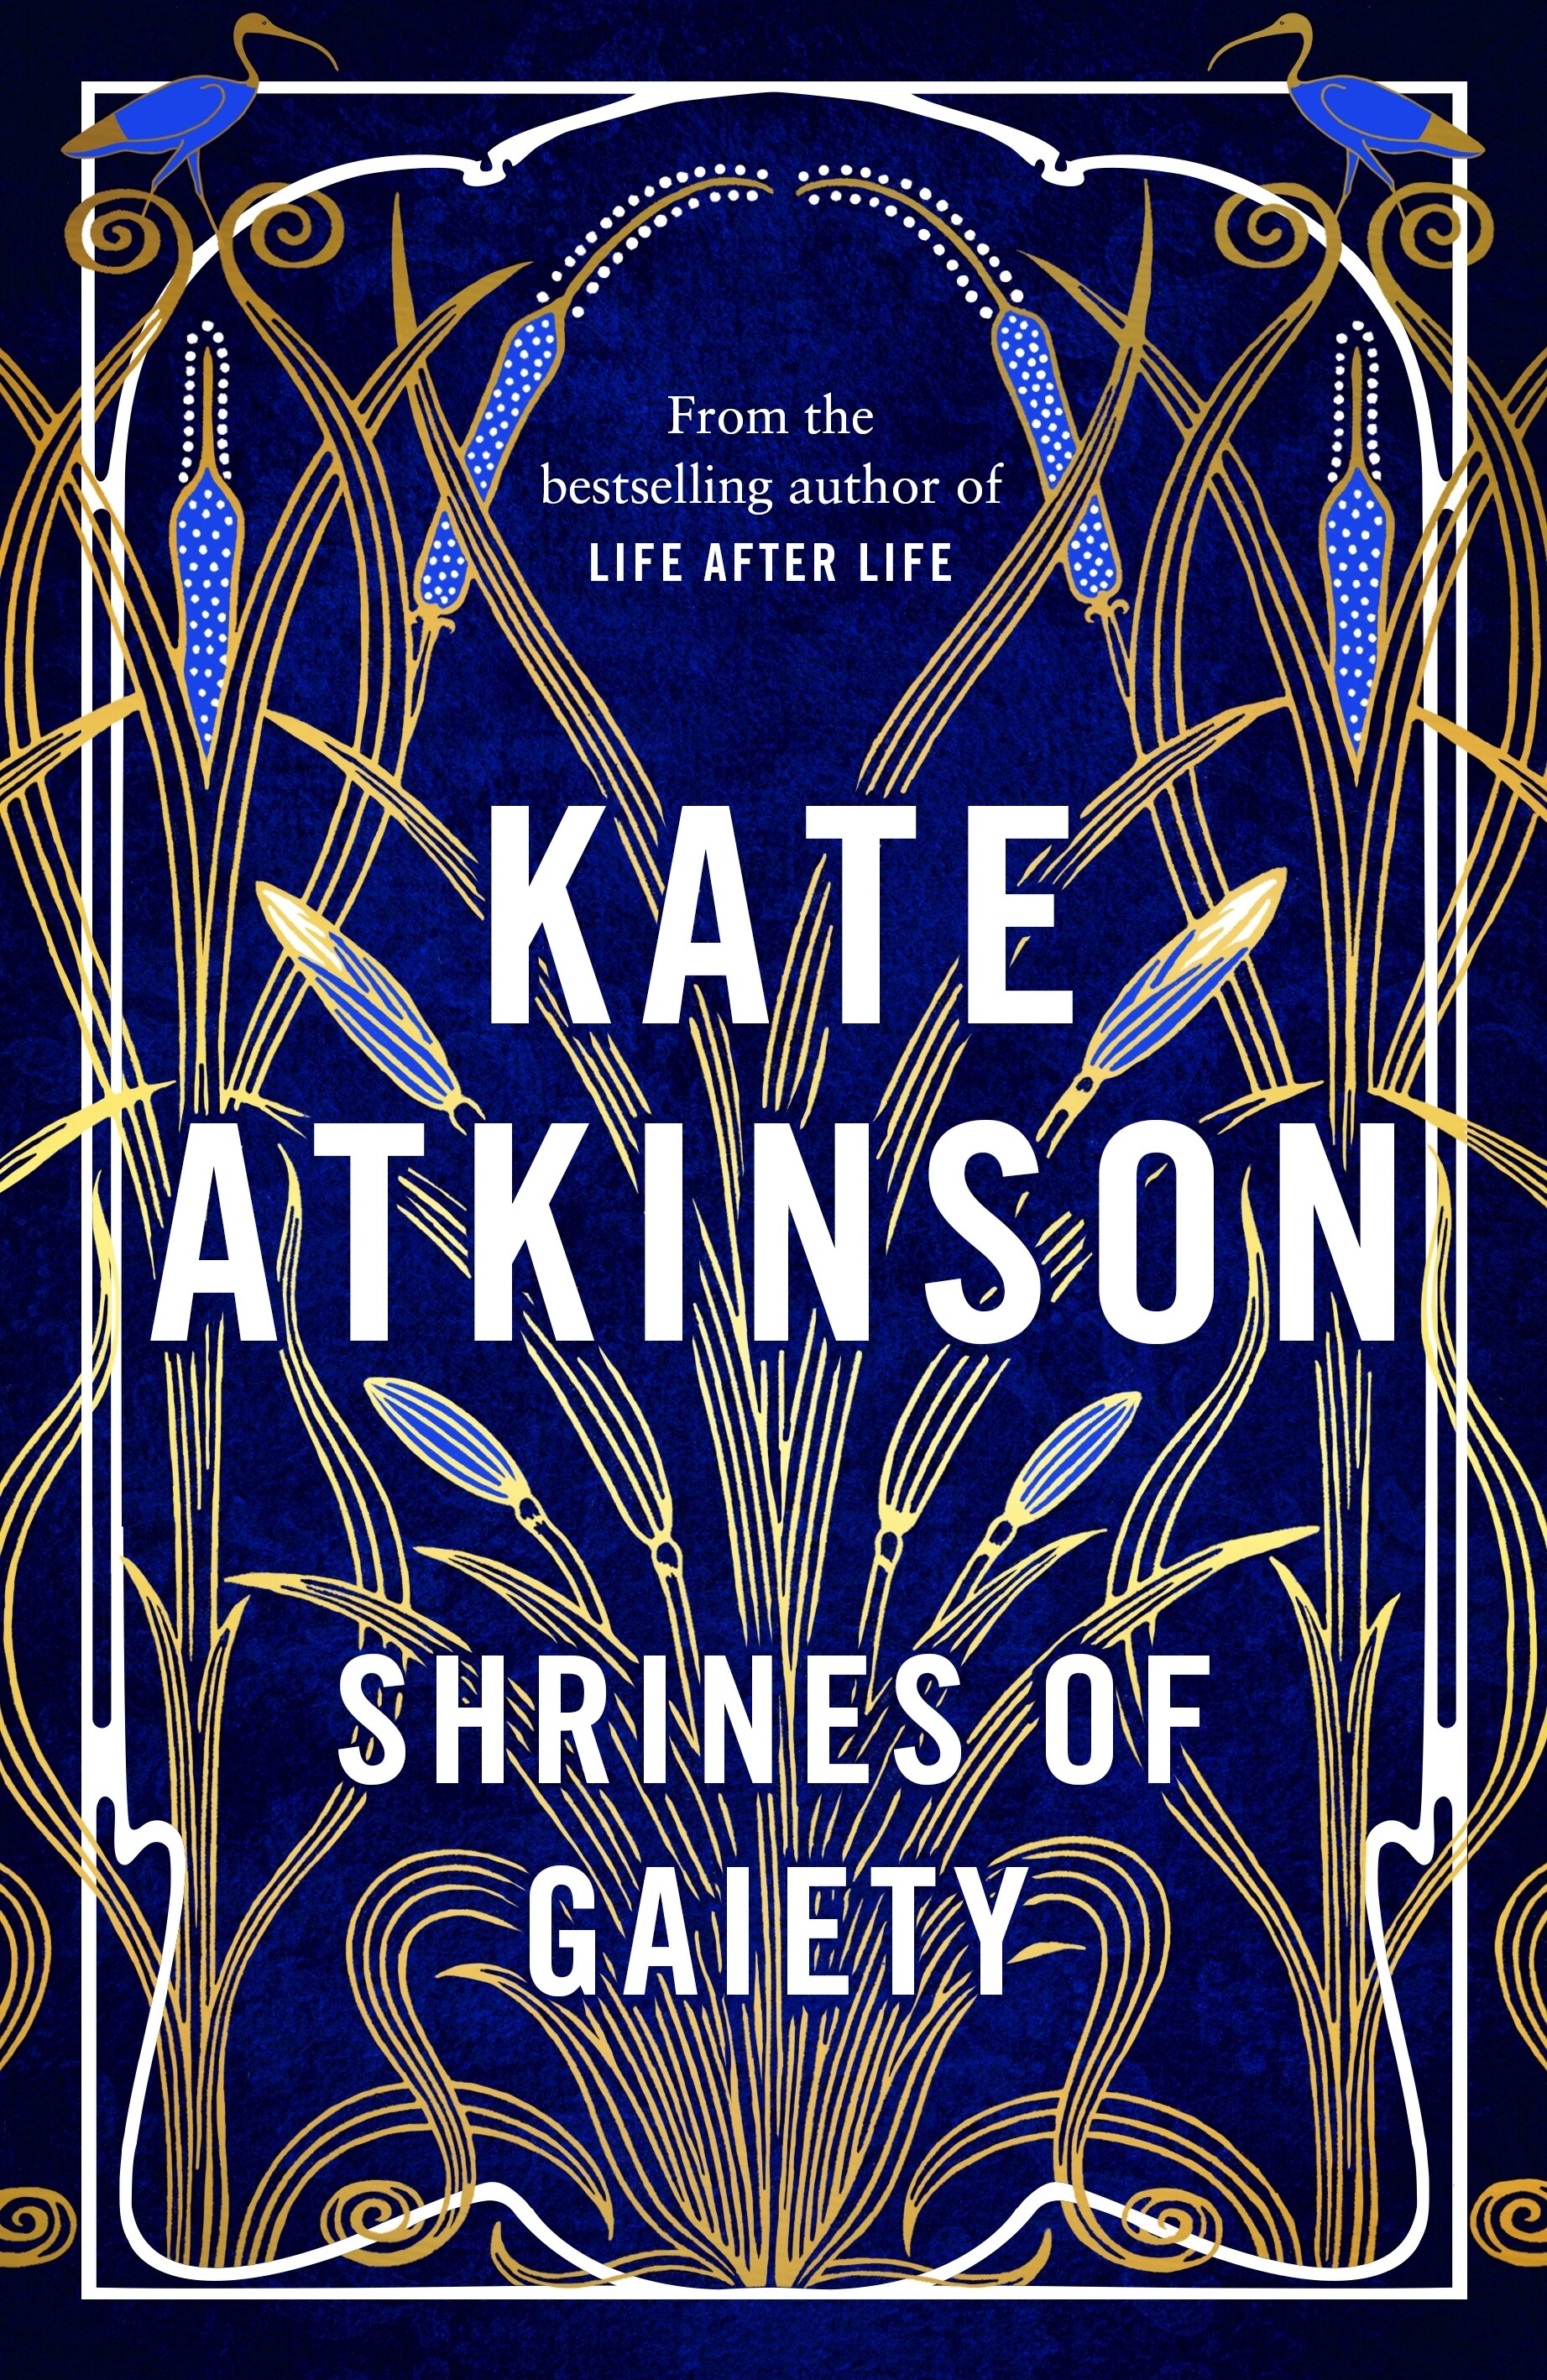 Book cover with text reading Shrines of Gaiety by Kate Atkinson